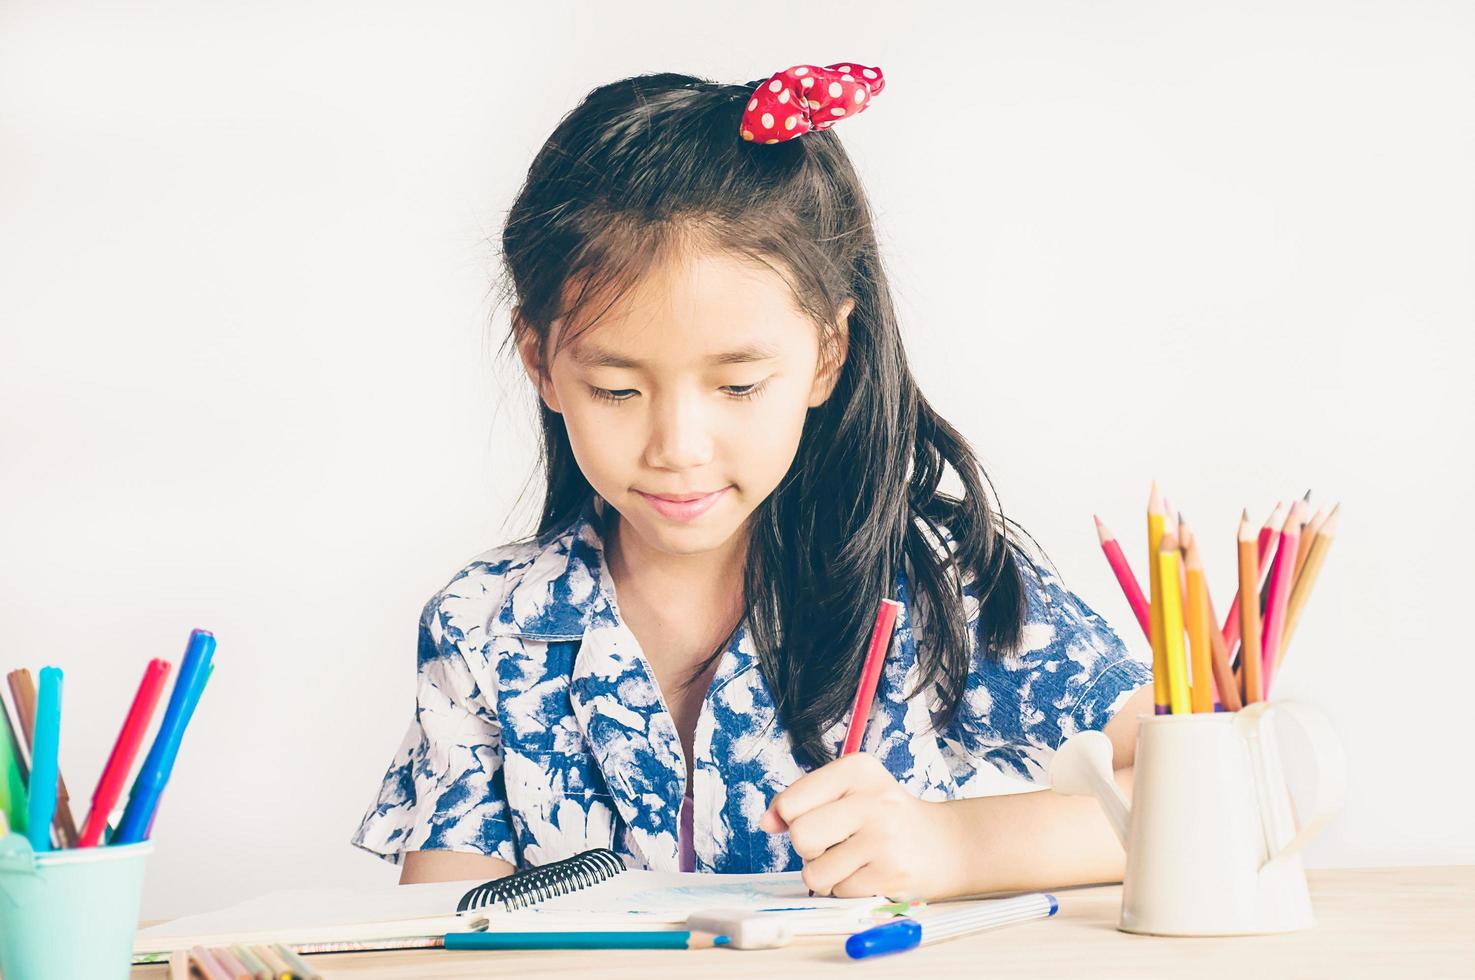 Vintage style photo of a girl is happily coloring a book